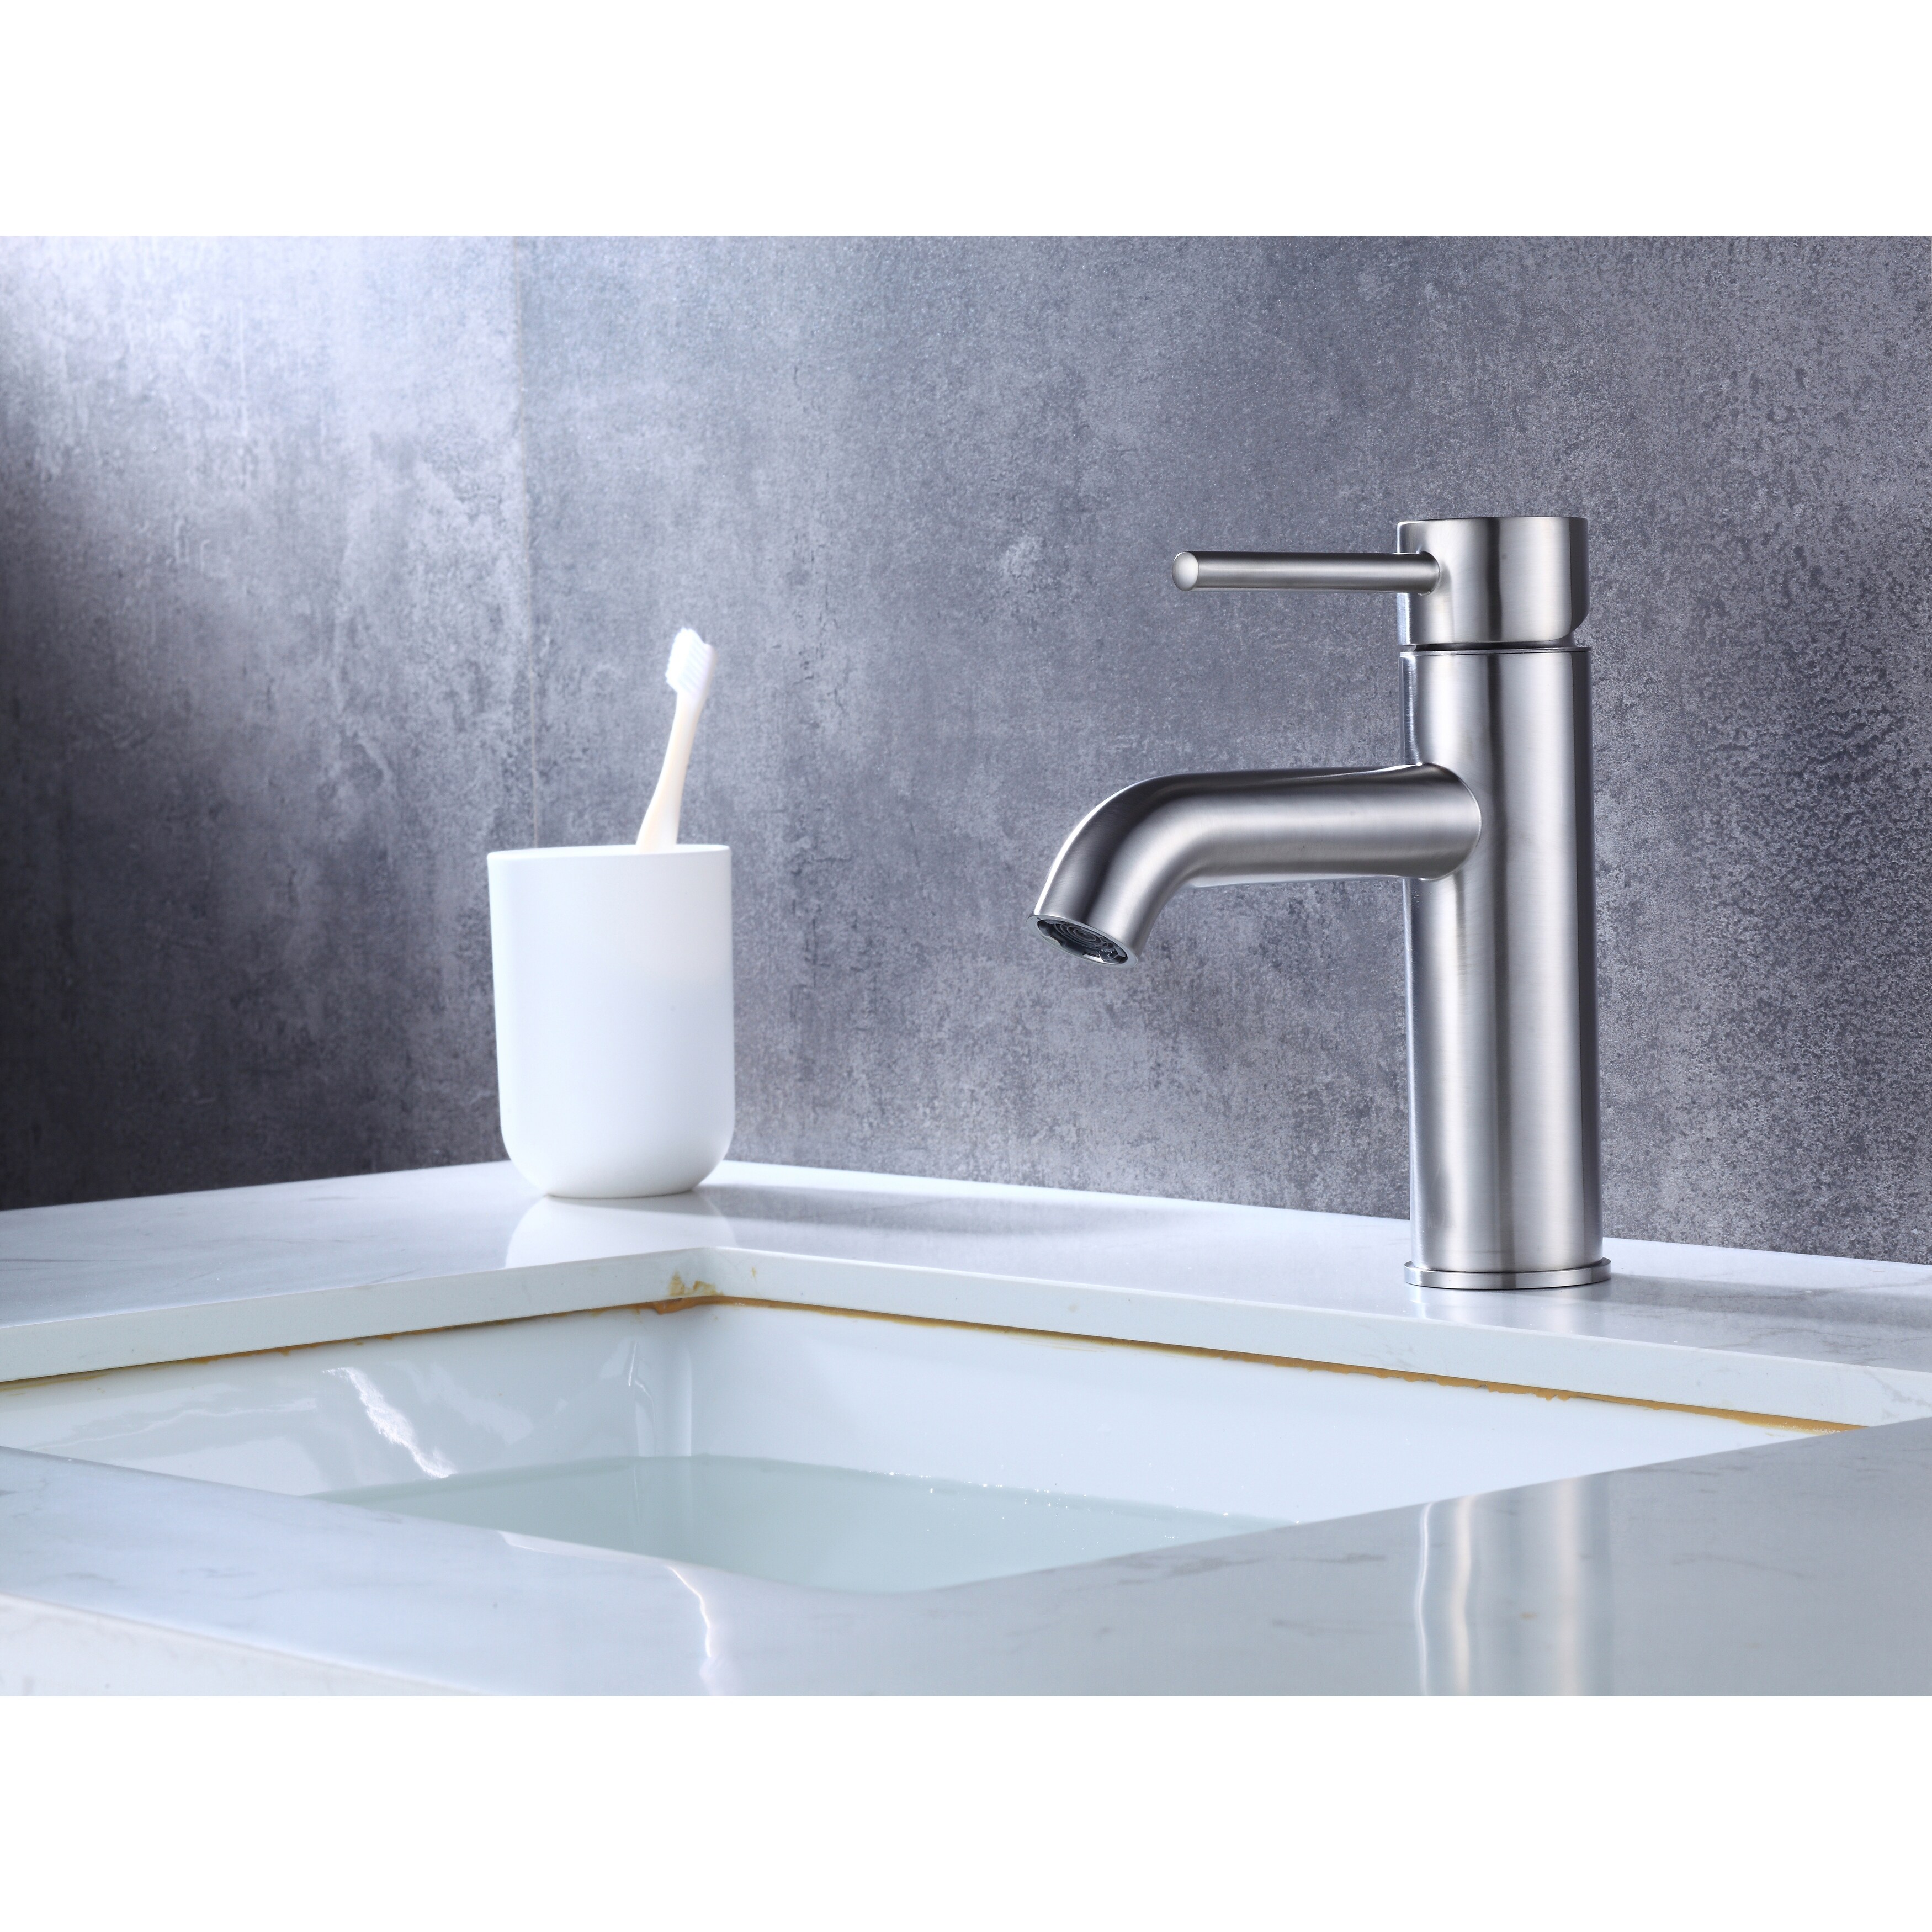 American Imaginations 1 Hole CUPC Approved Lead Free Brass Faucet Set In Brushed Nickel Color - Overflow Drain Incl.